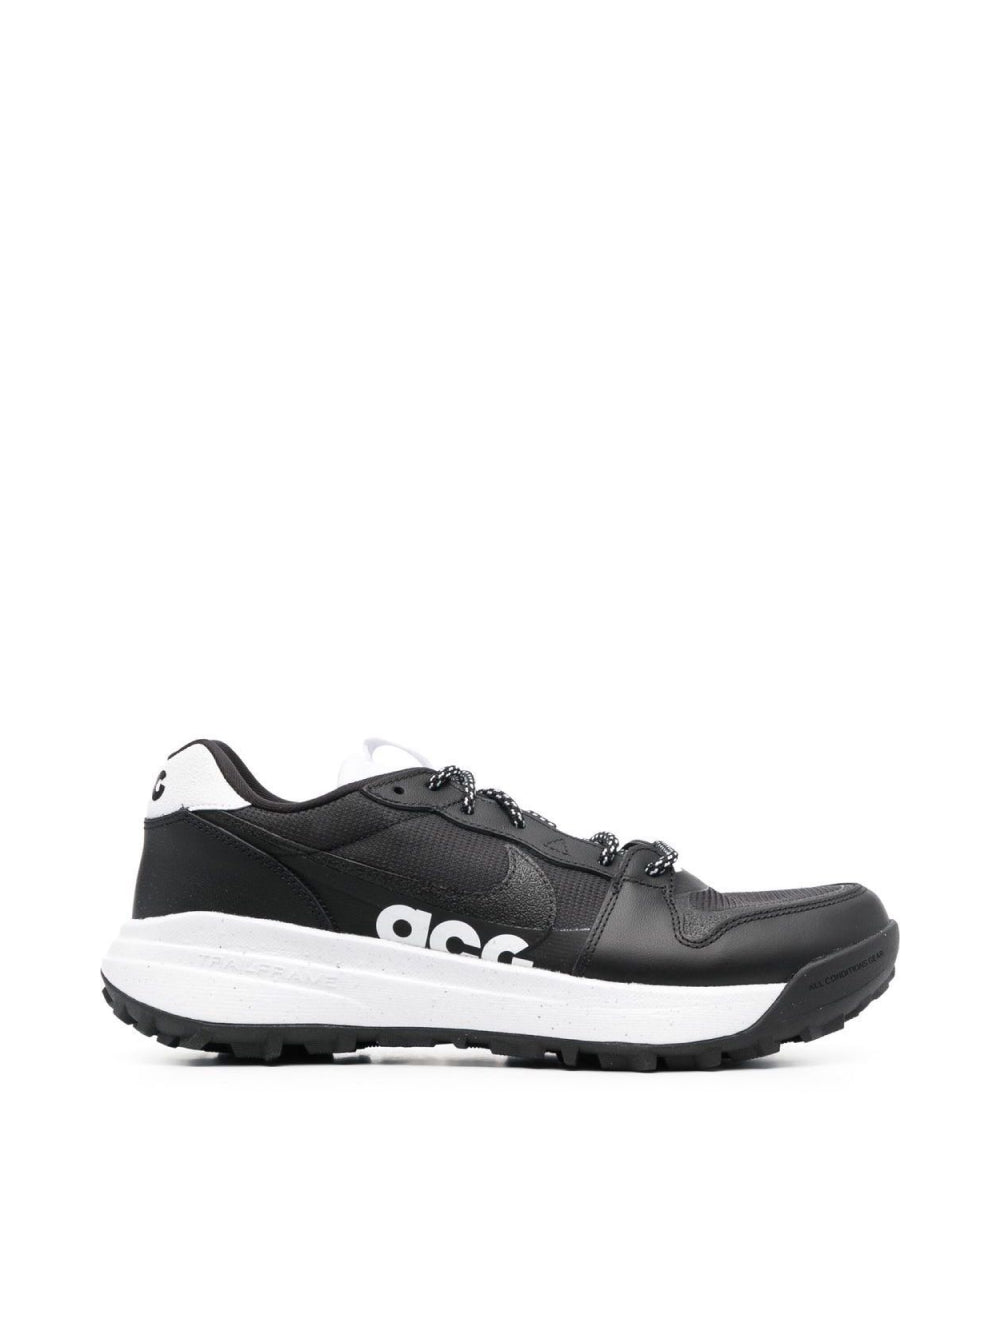 Nike-OUTLET-SALE-ACG Lowcate Black Sneakers-ARCHIVIST